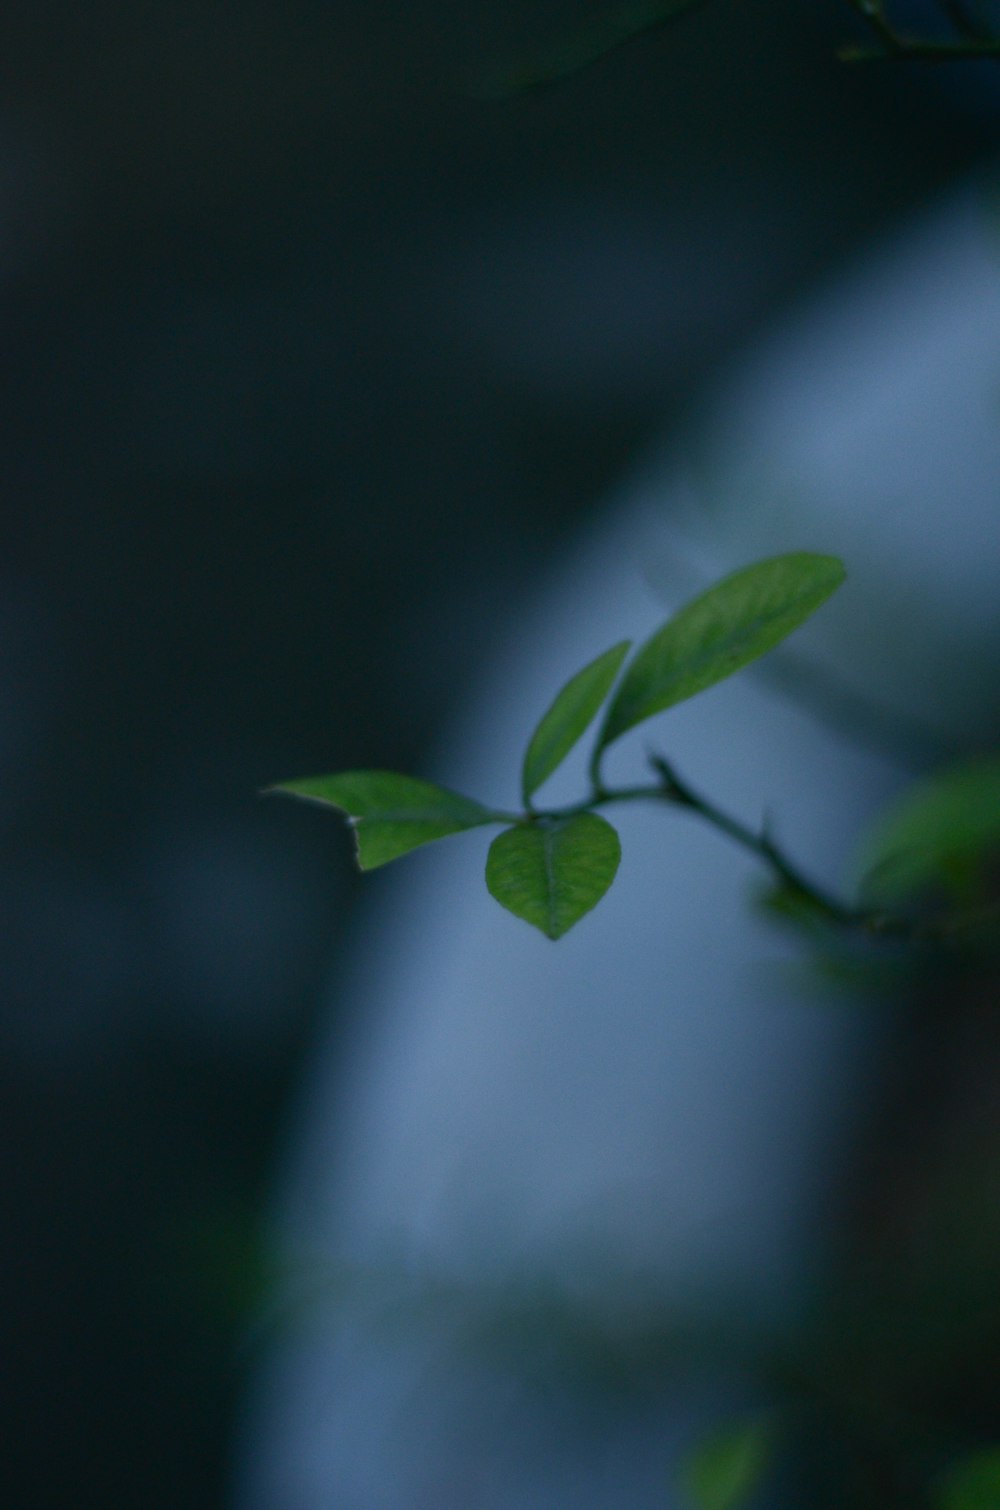 a branch with green leaves on a blurry background